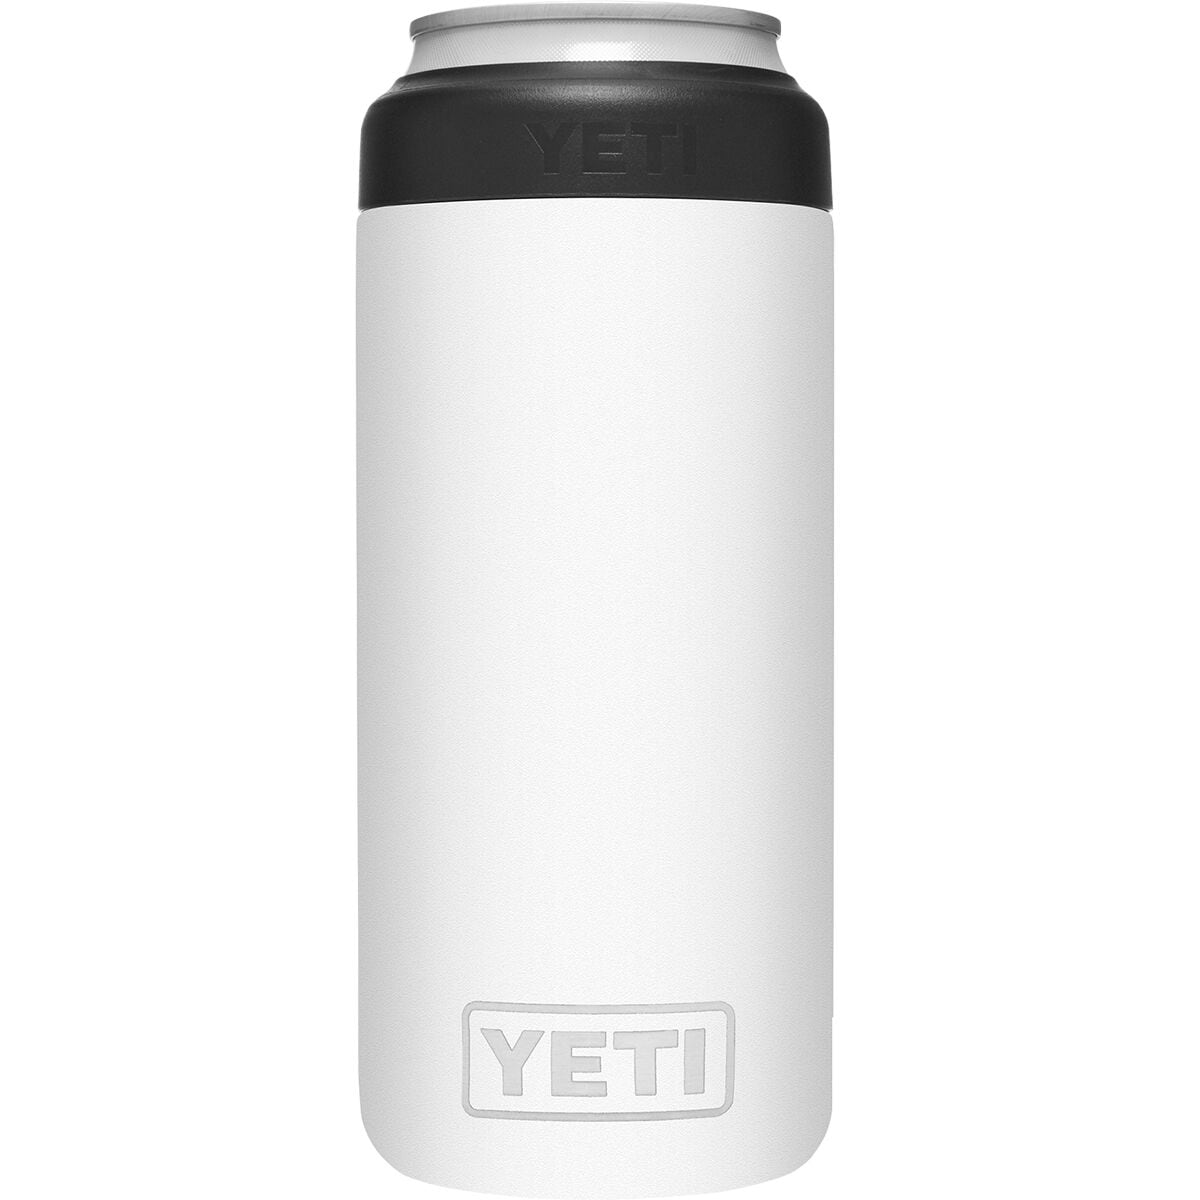 Photos - Other Accessories Yeti Rambler 16oz Colster Tall Can Insulator 